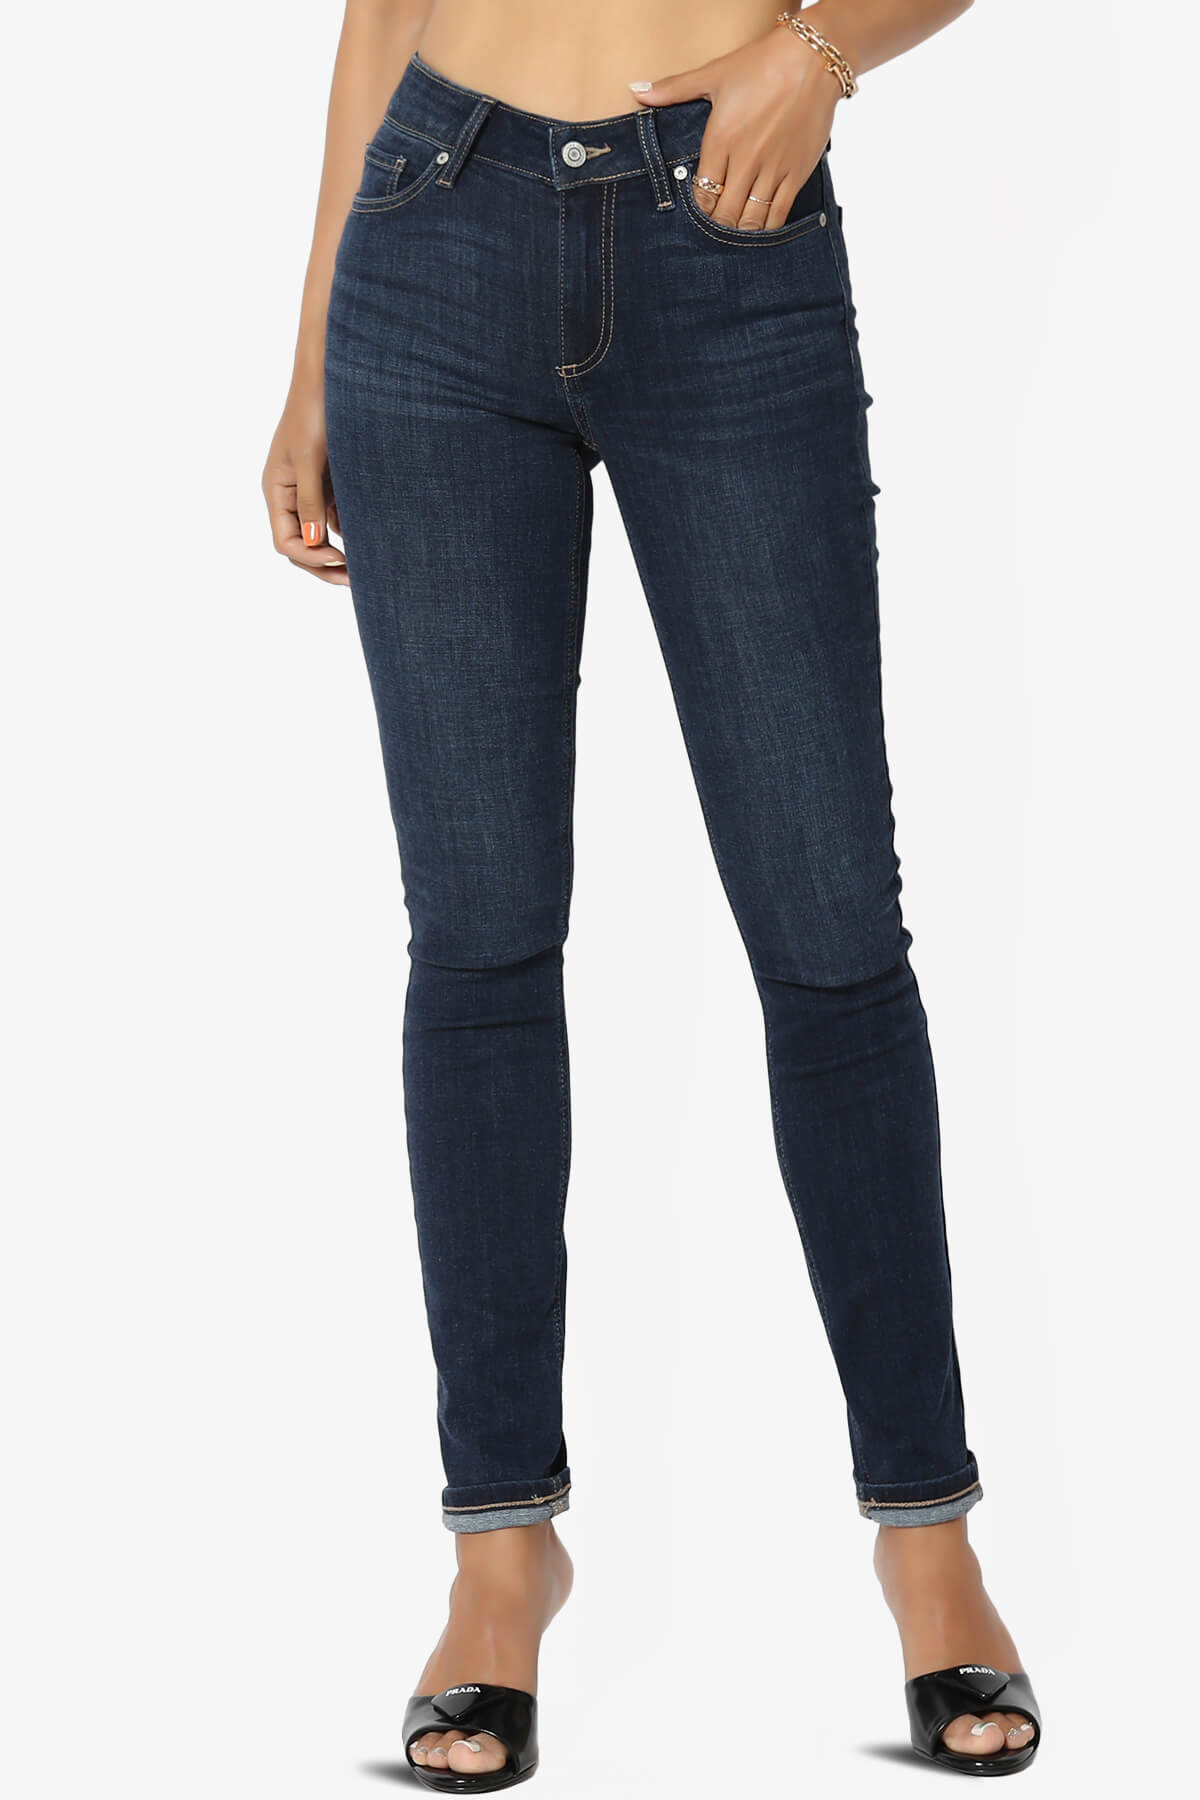 Load image into Gallery viewer, Jude Mid Rise Ankle Skinny Jeans in Bseat DARK_1
